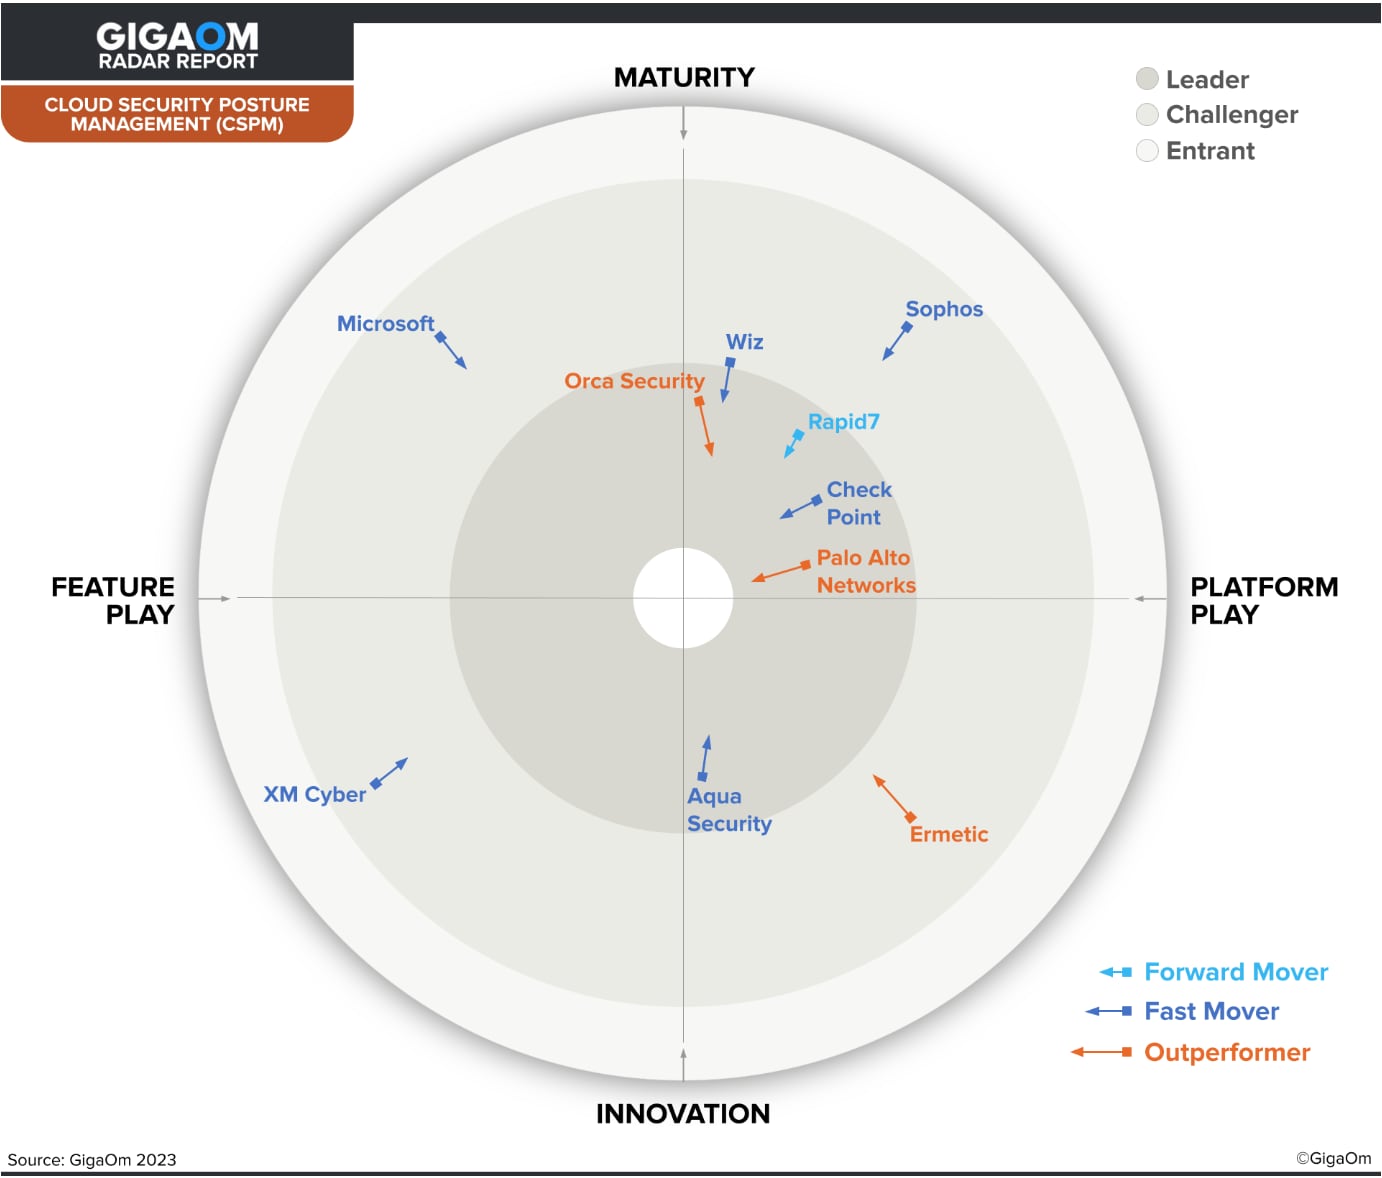 GigaOm Radar for Cloud Security Posture Management ranks Prisma Cloud by Palo Alto Networks as the Leader by showing it closest to the center of their CSPM radar.